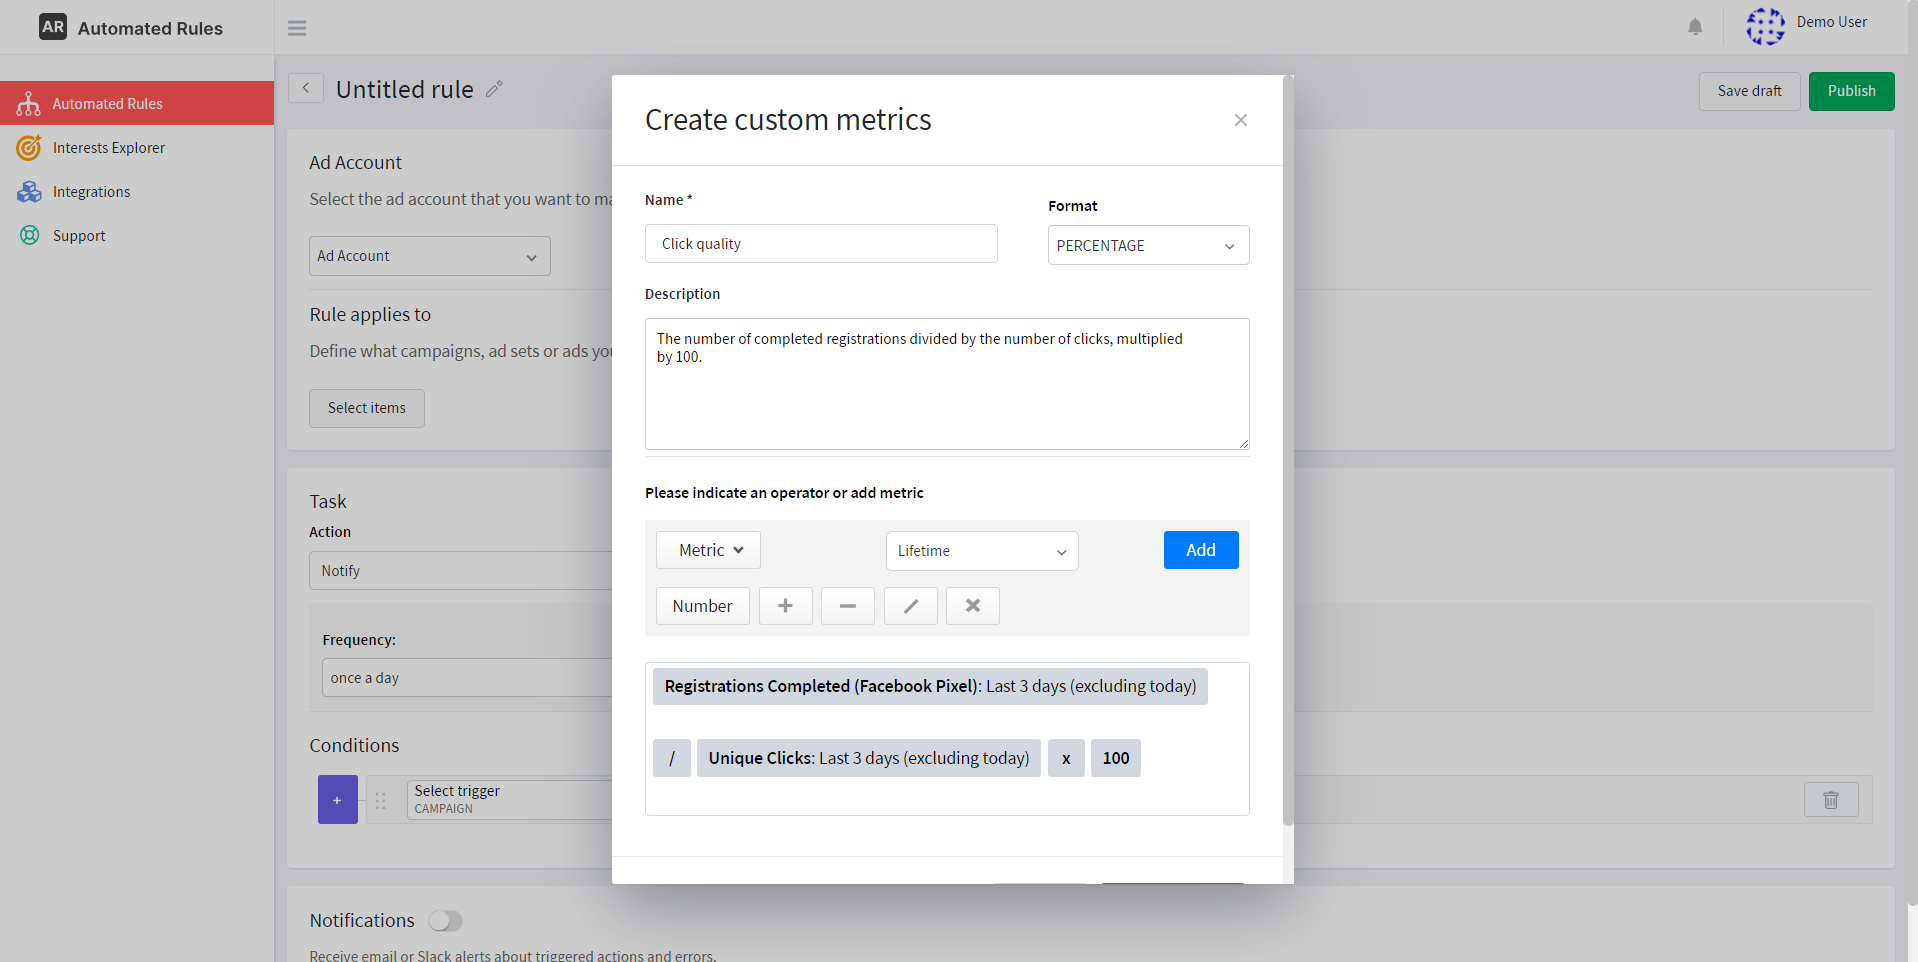 Creating the Click quality metric with AutomatedRules